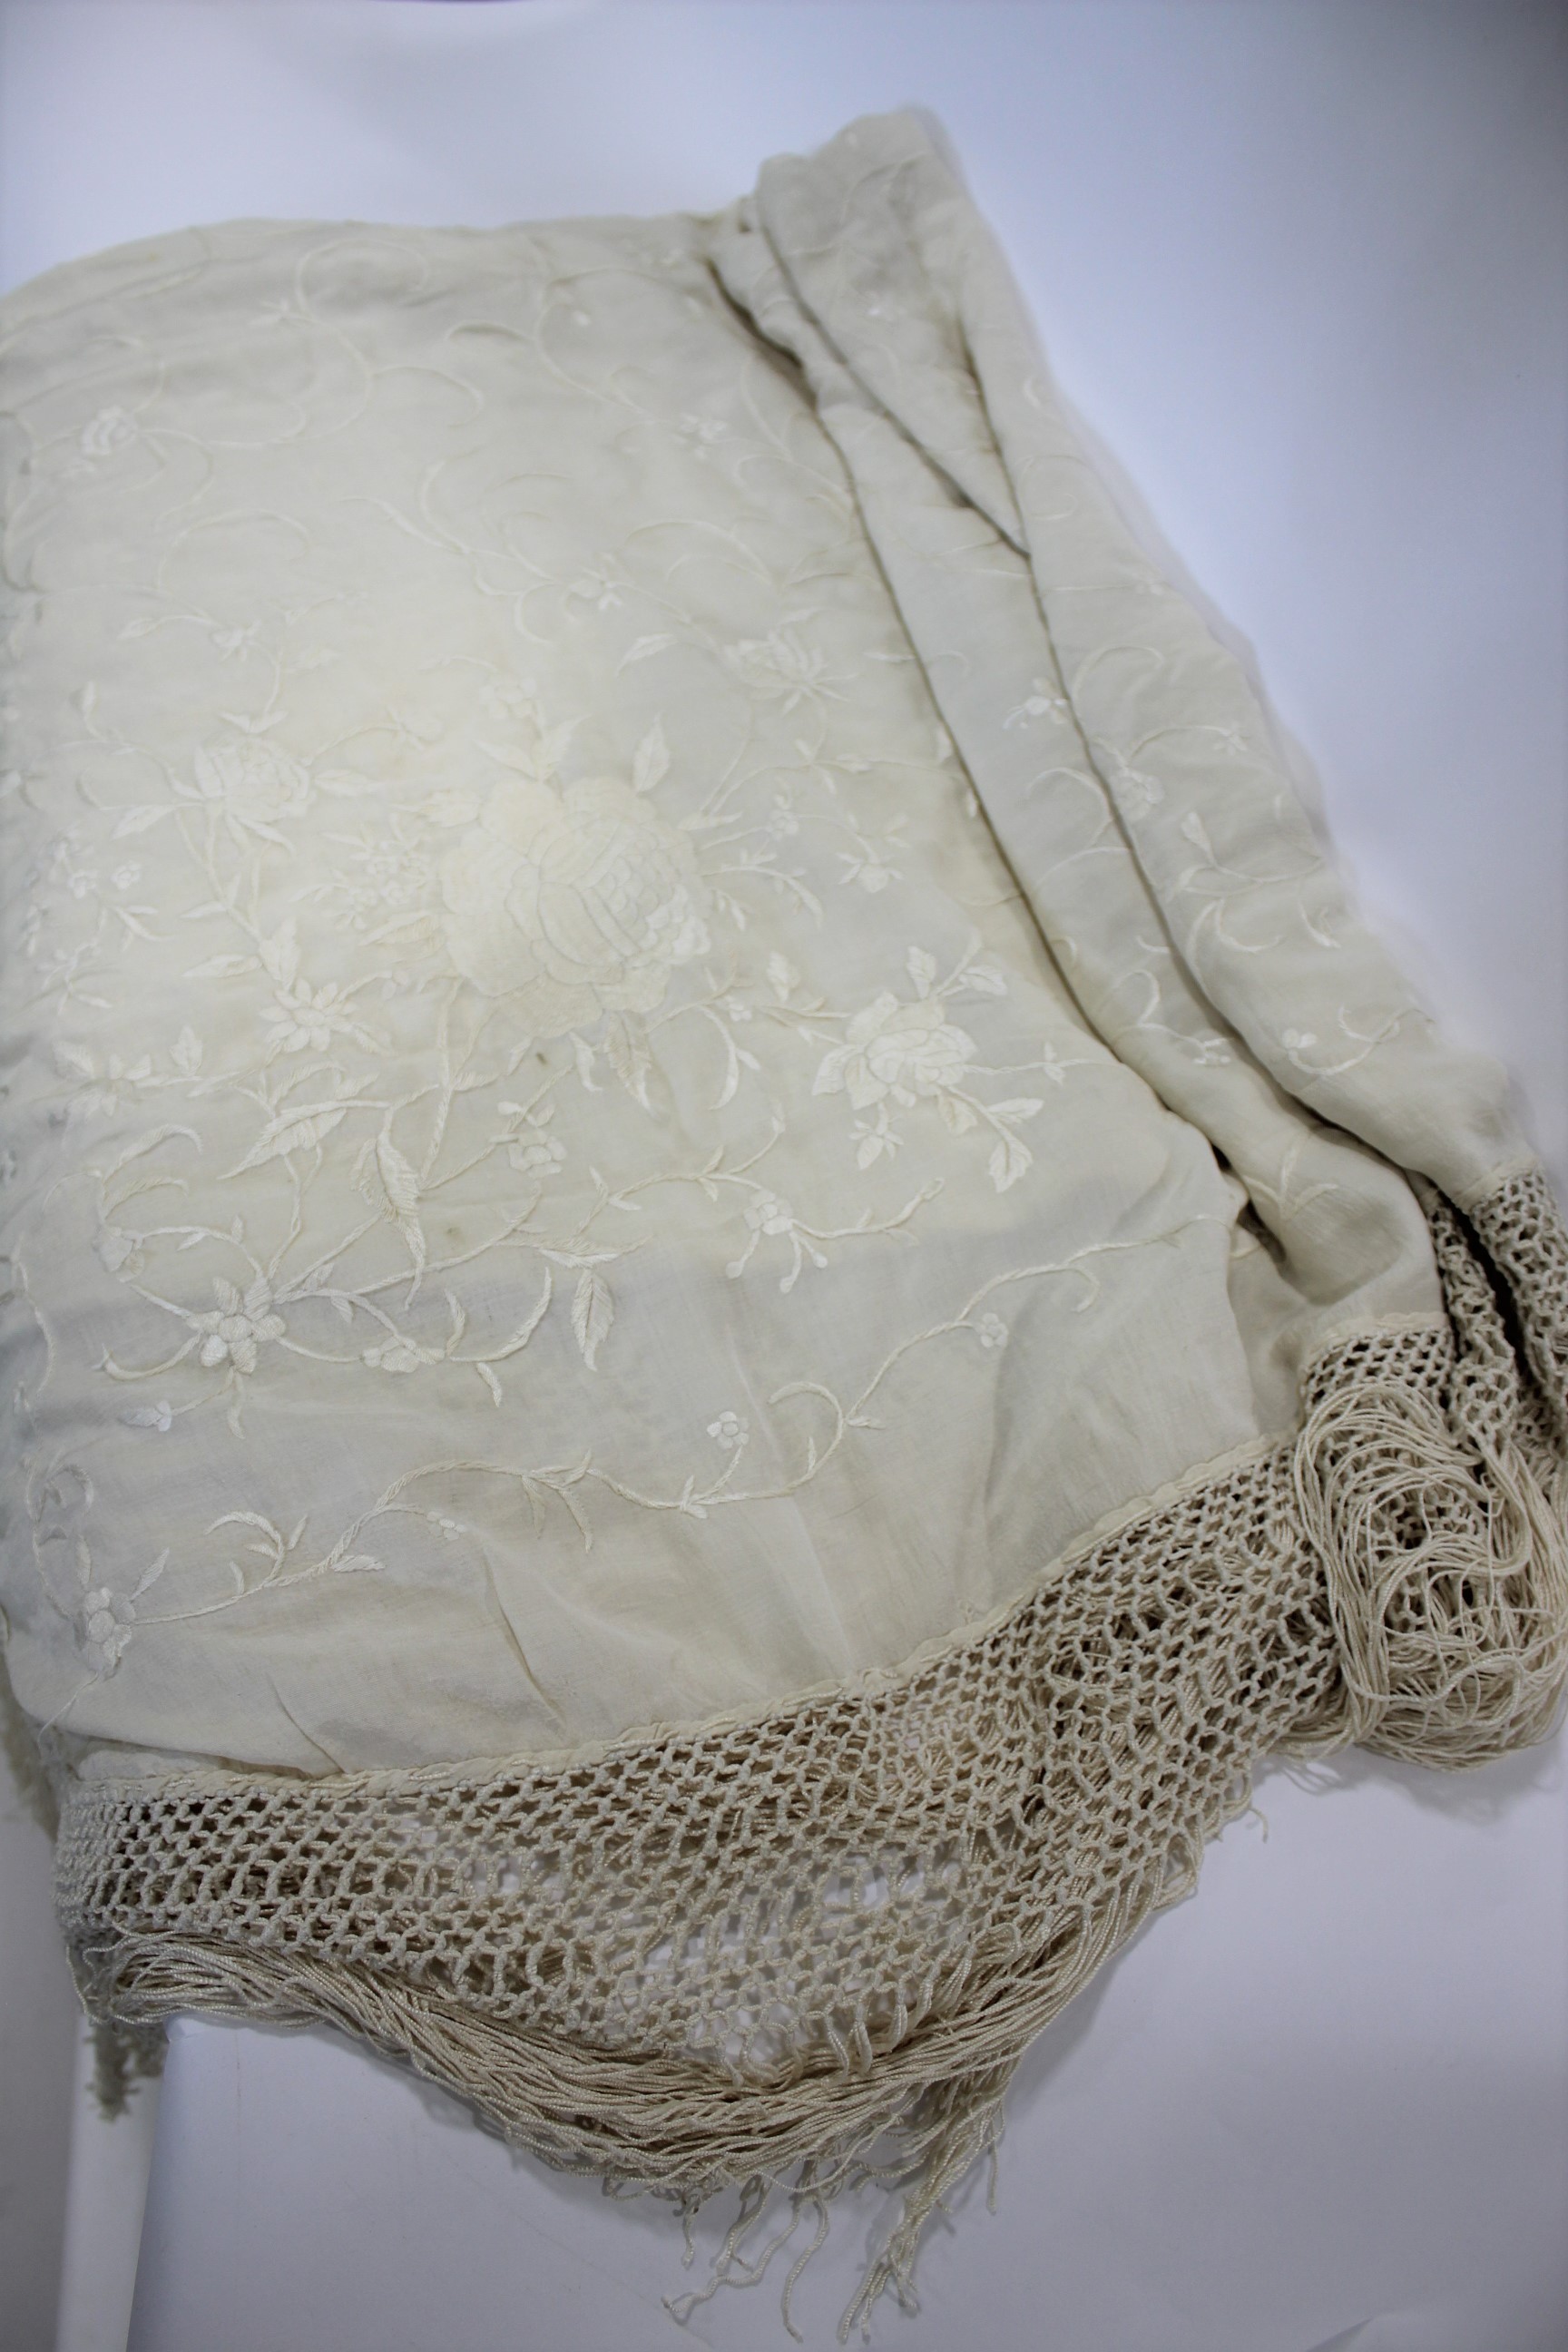 CHINESE SHAWL a late 19th/early 20thc Chinese embroidered silk shawl, with a fringed border. Shawl - Image 3 of 3